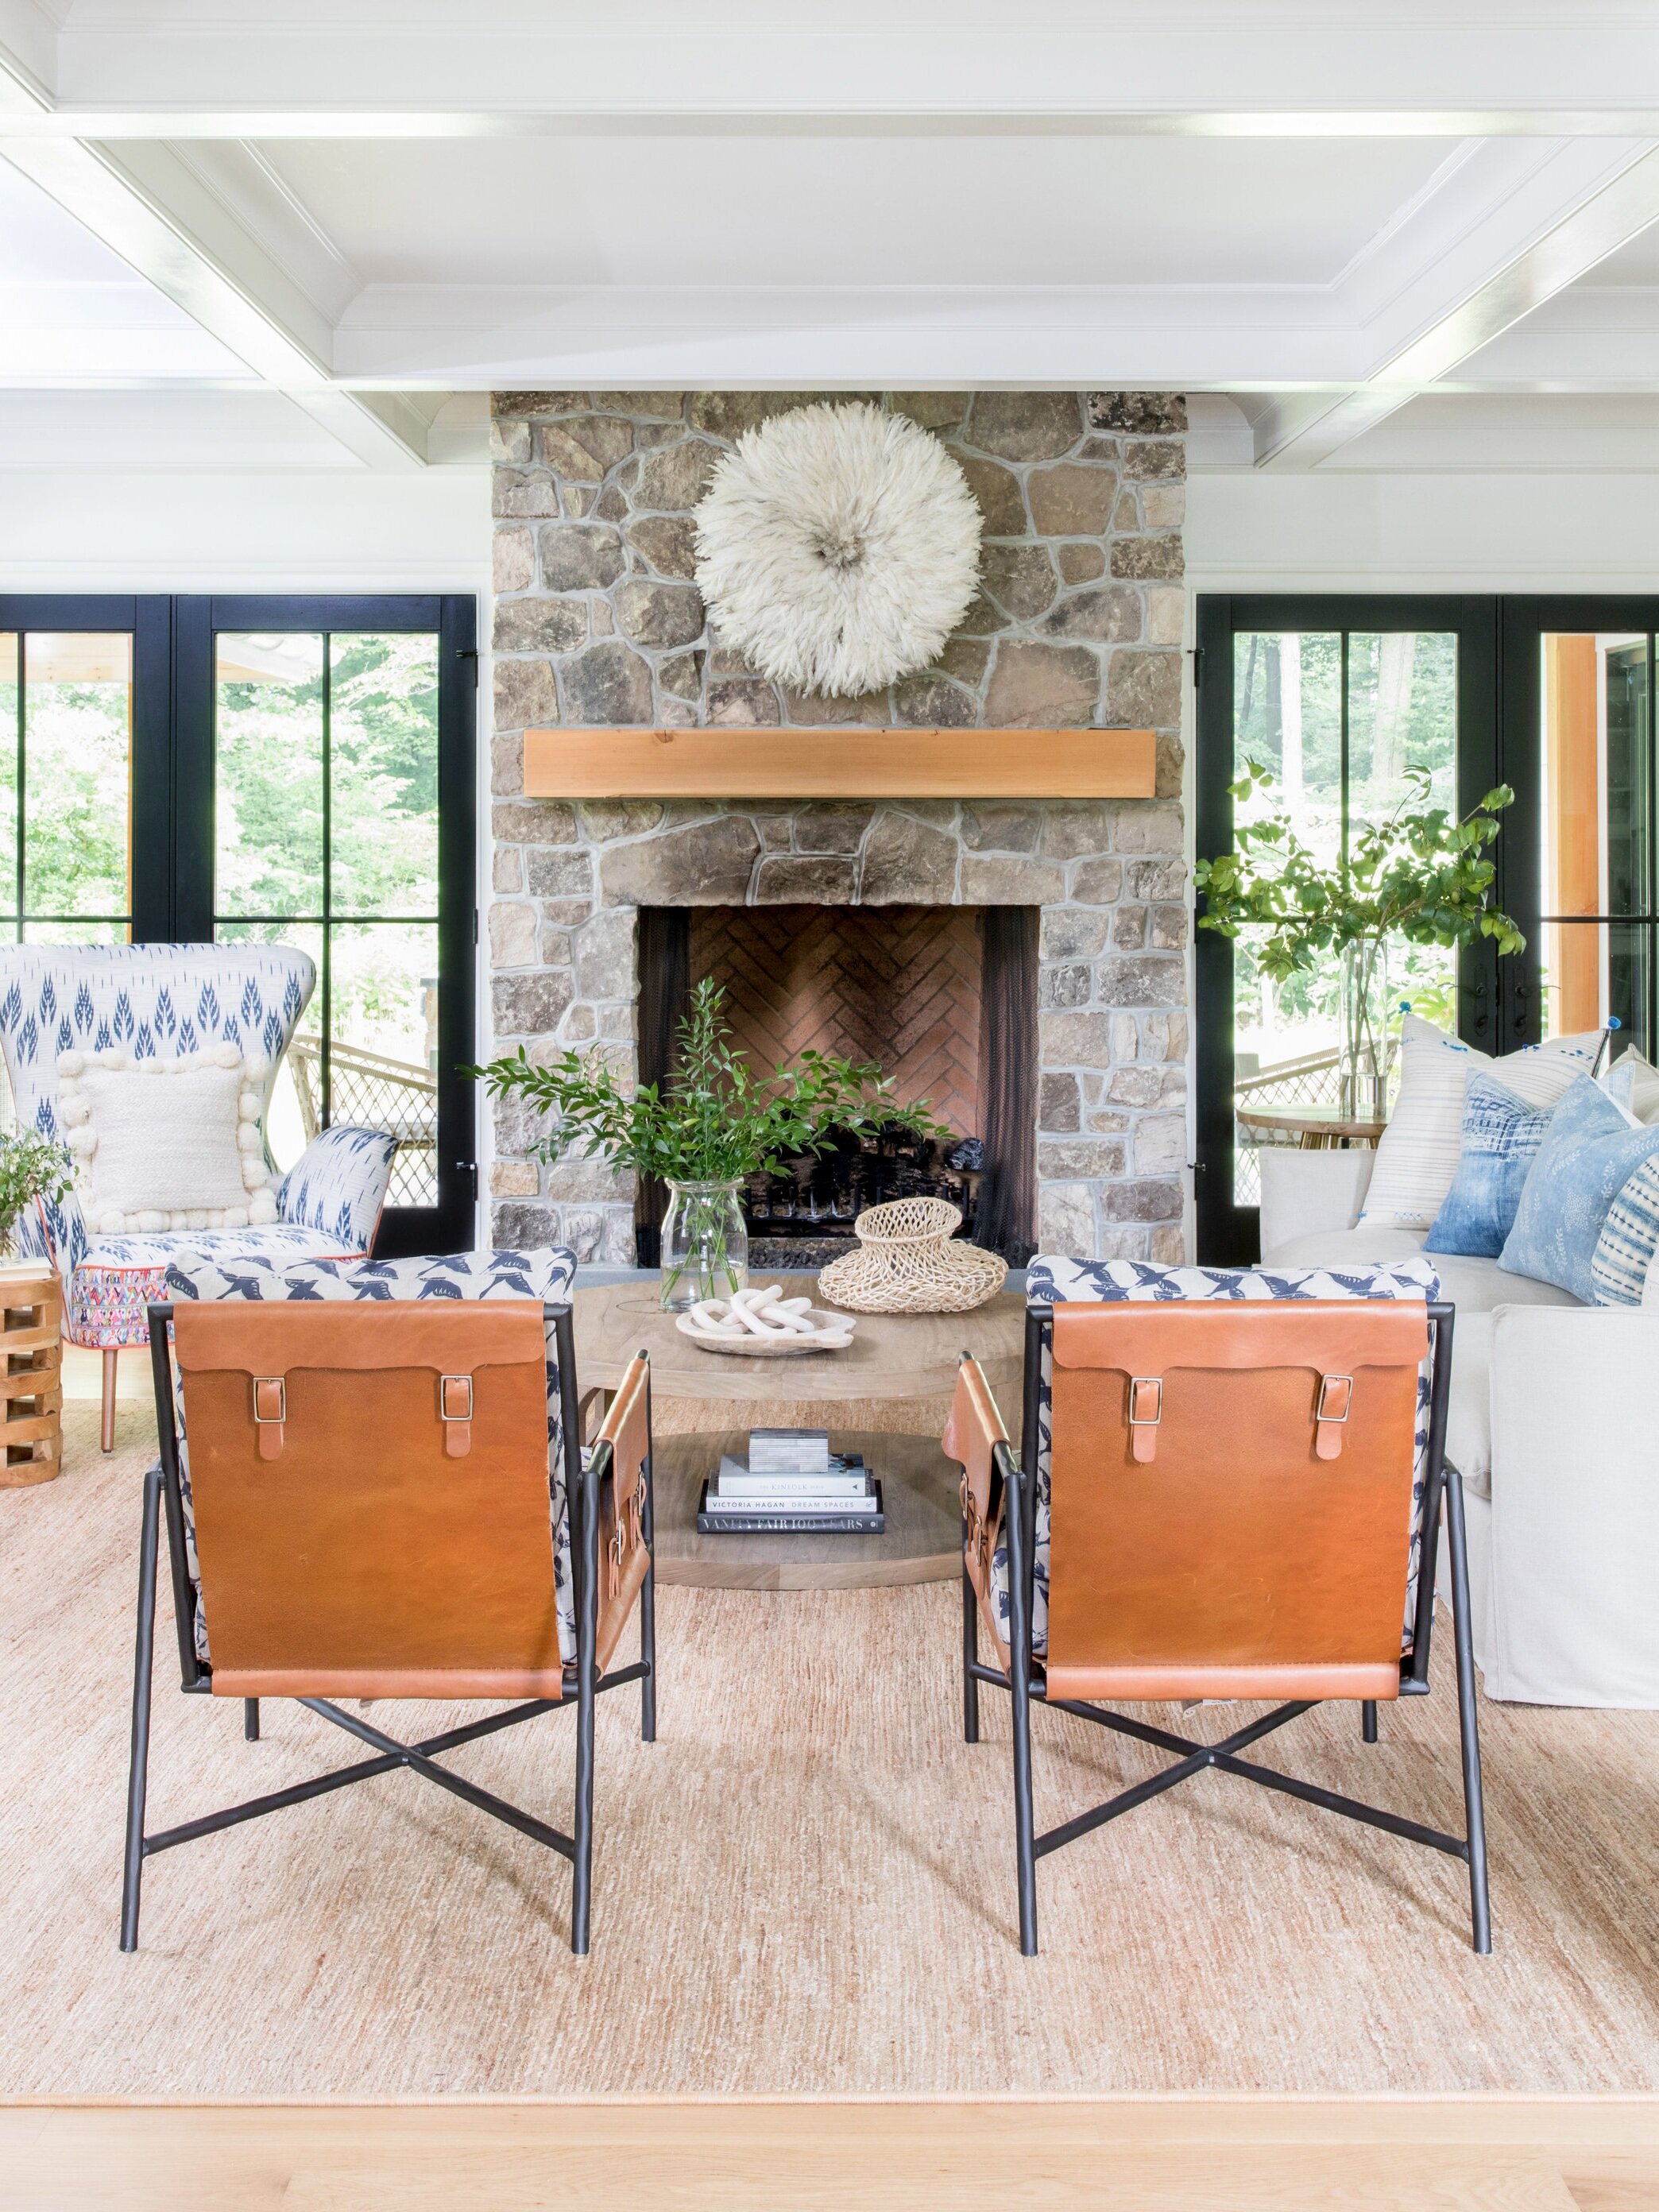 Stephanie+Kraus+Designs+Farmhouse+Family+Room+Stone+Fireplace+Leather+Chairs+Black+Windows+Coffered+Ceiling+Shiplap